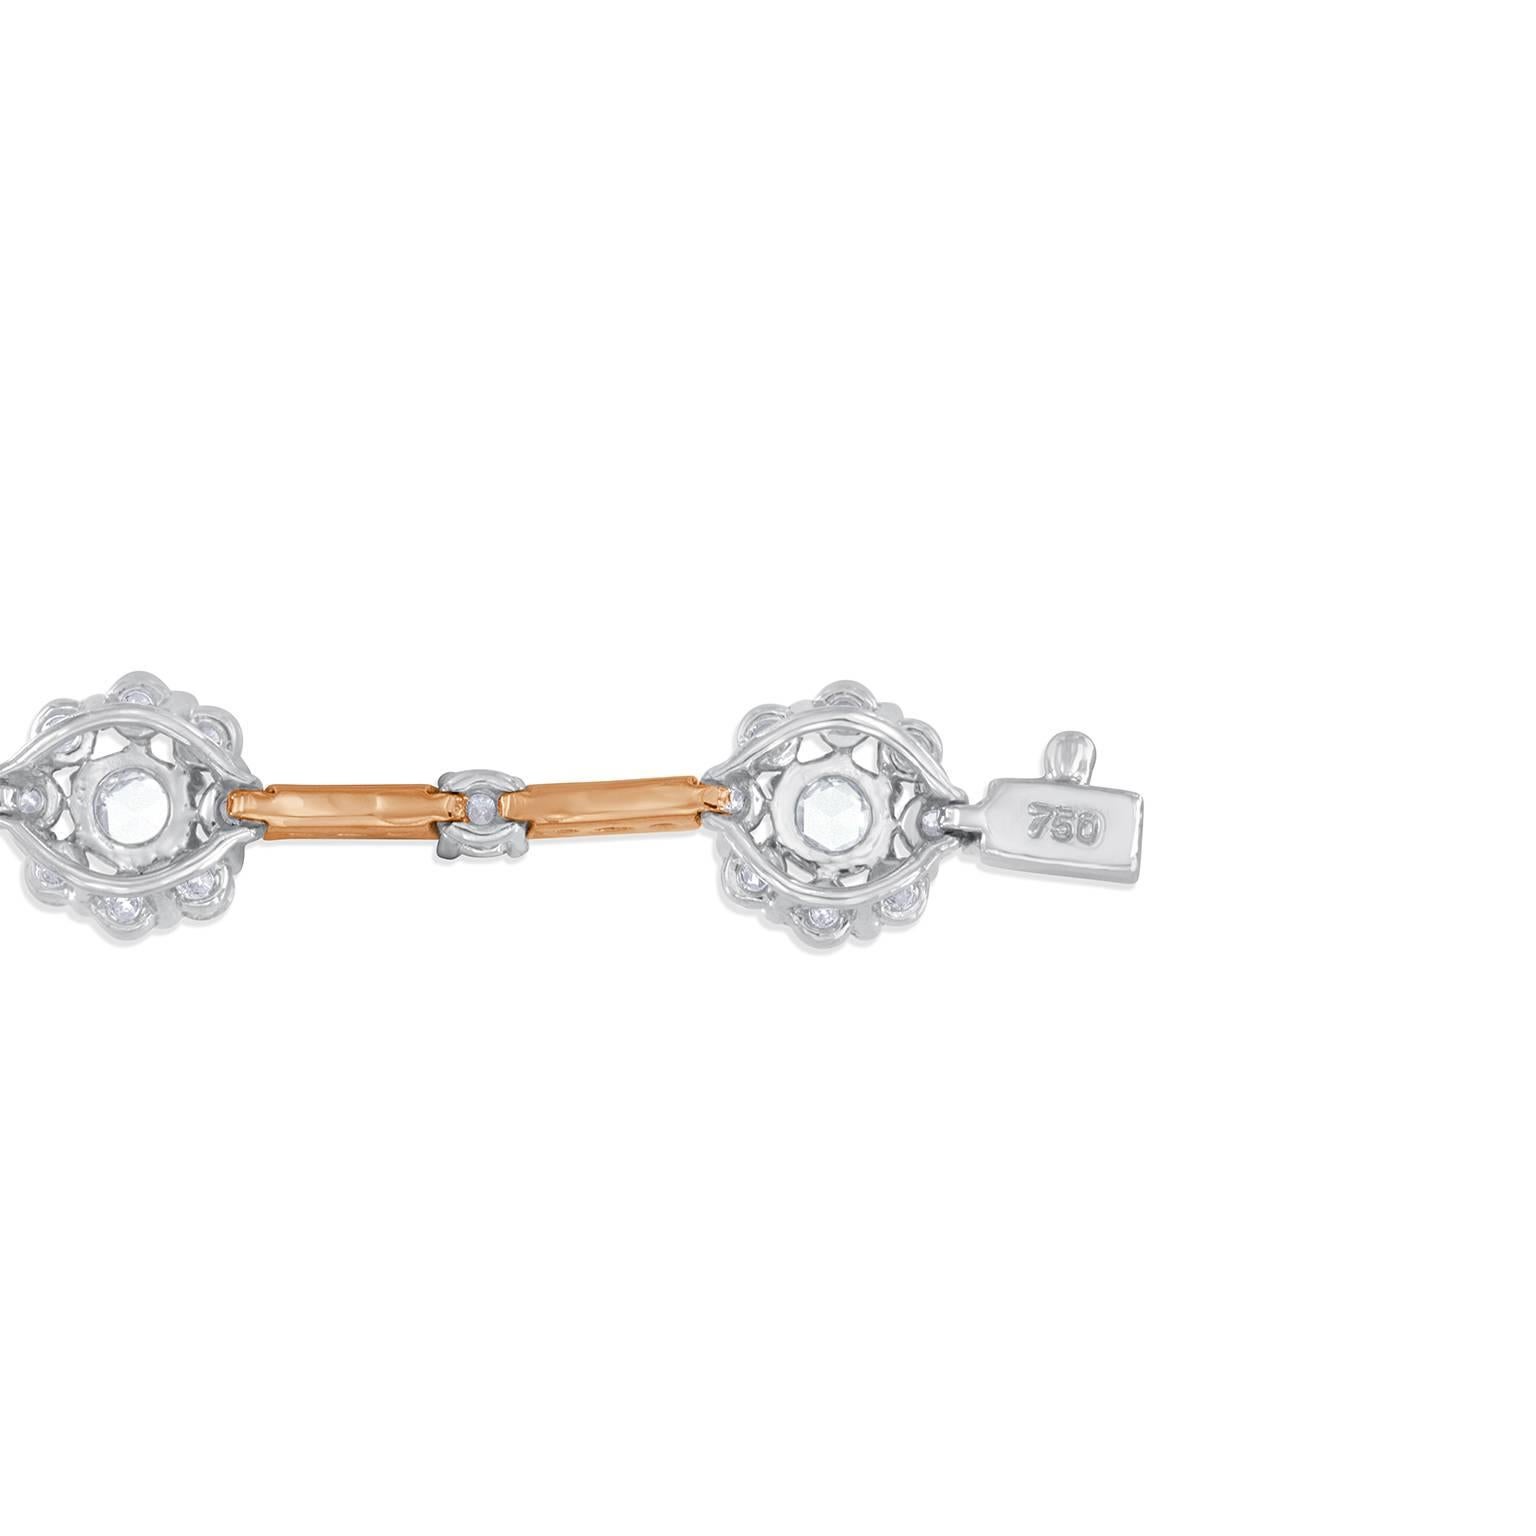 4.00 Carat Rose Cut Diamond and Pink Diamond Rose Gold Bracelet In Excellent Condition For Sale In Grosse Pointe Woods, MI